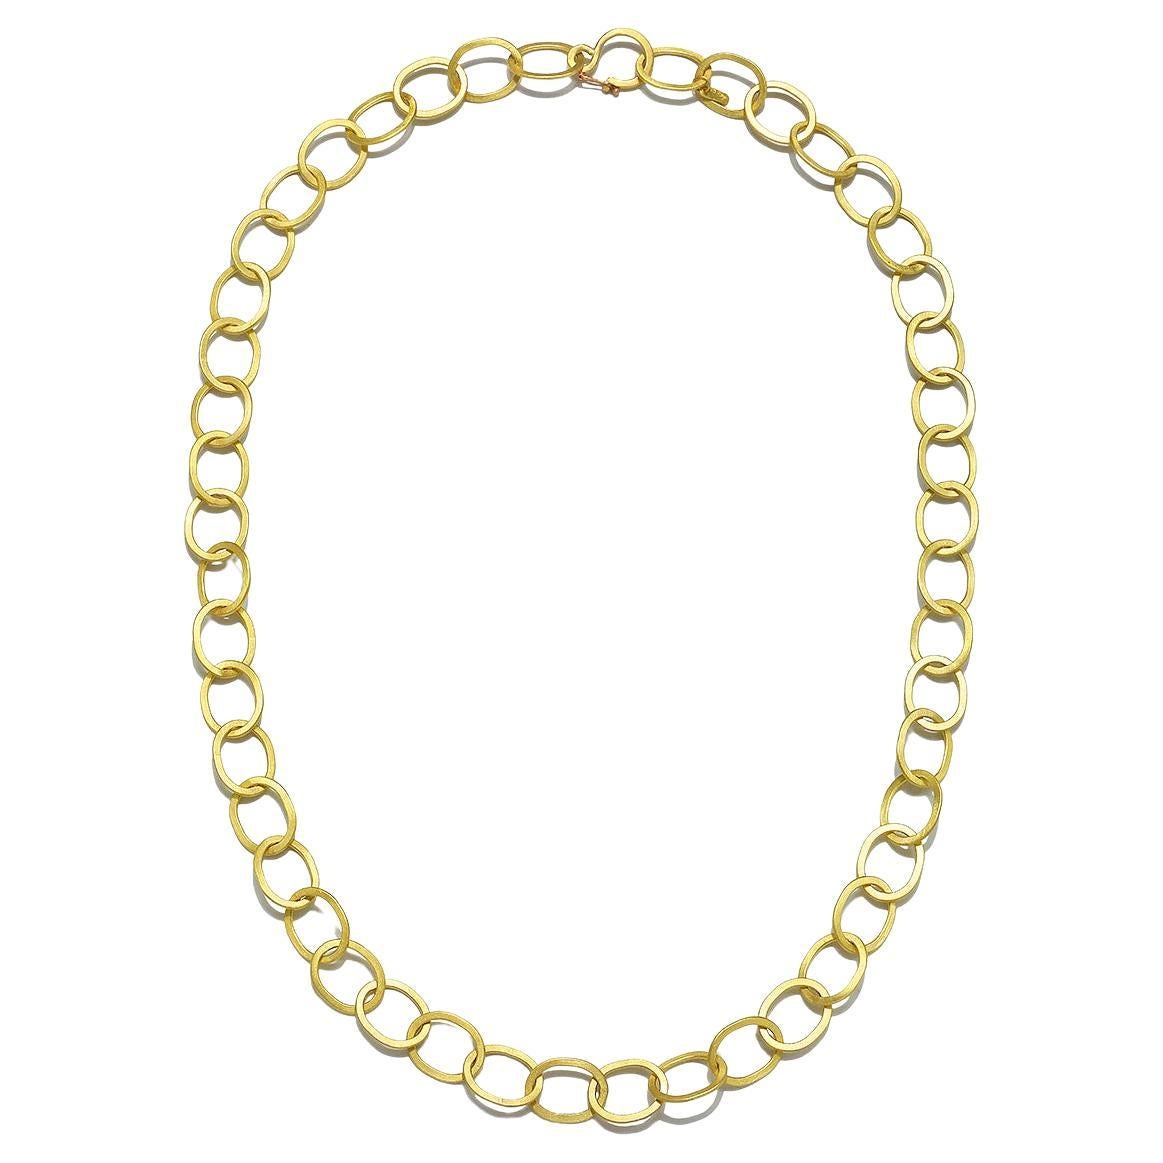 Contemporary Faye Kim 18 Karat Gold Heavy Oval Planished XL Link Chain and Large Oval Locket For Sale